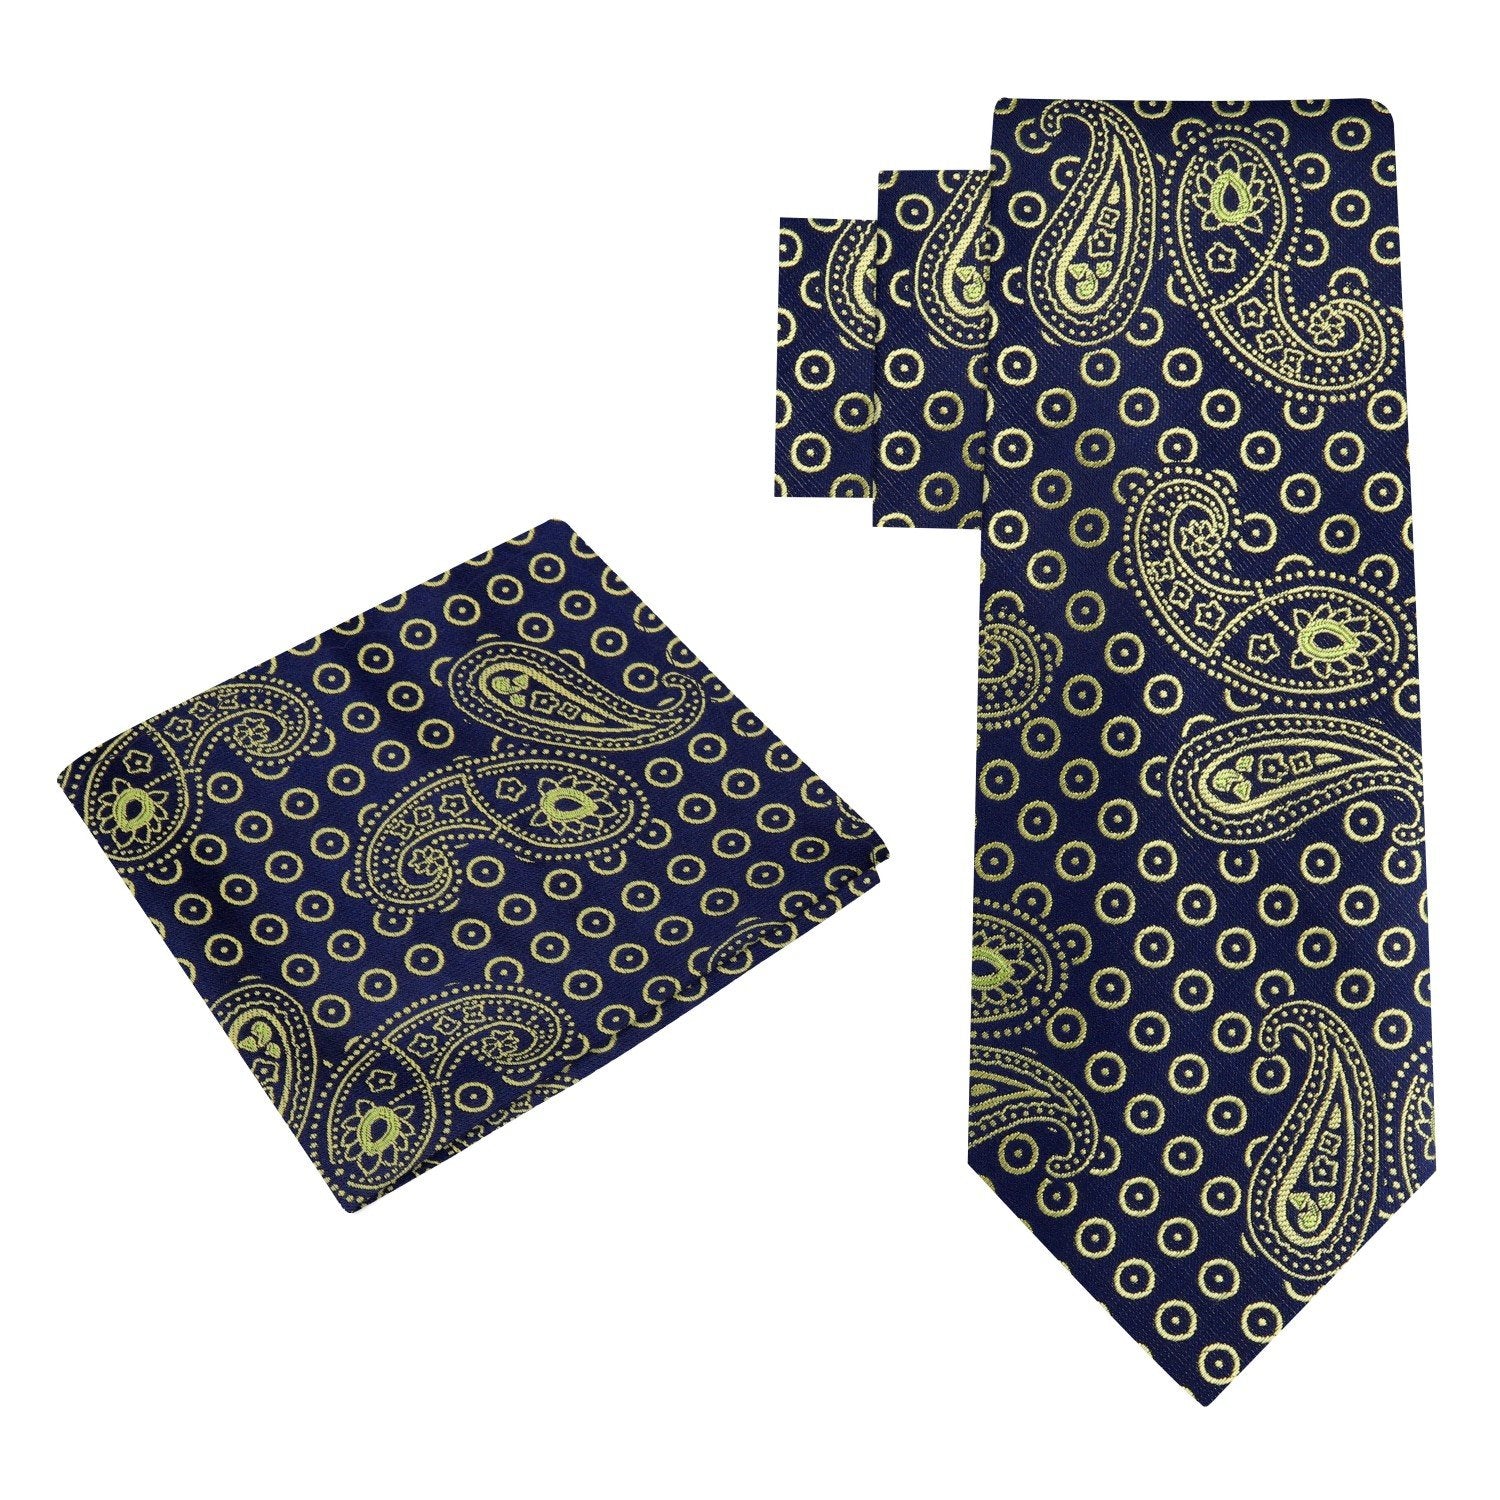 Alt View: Deep Blue, Glow Dots and Paisley Tie and Square